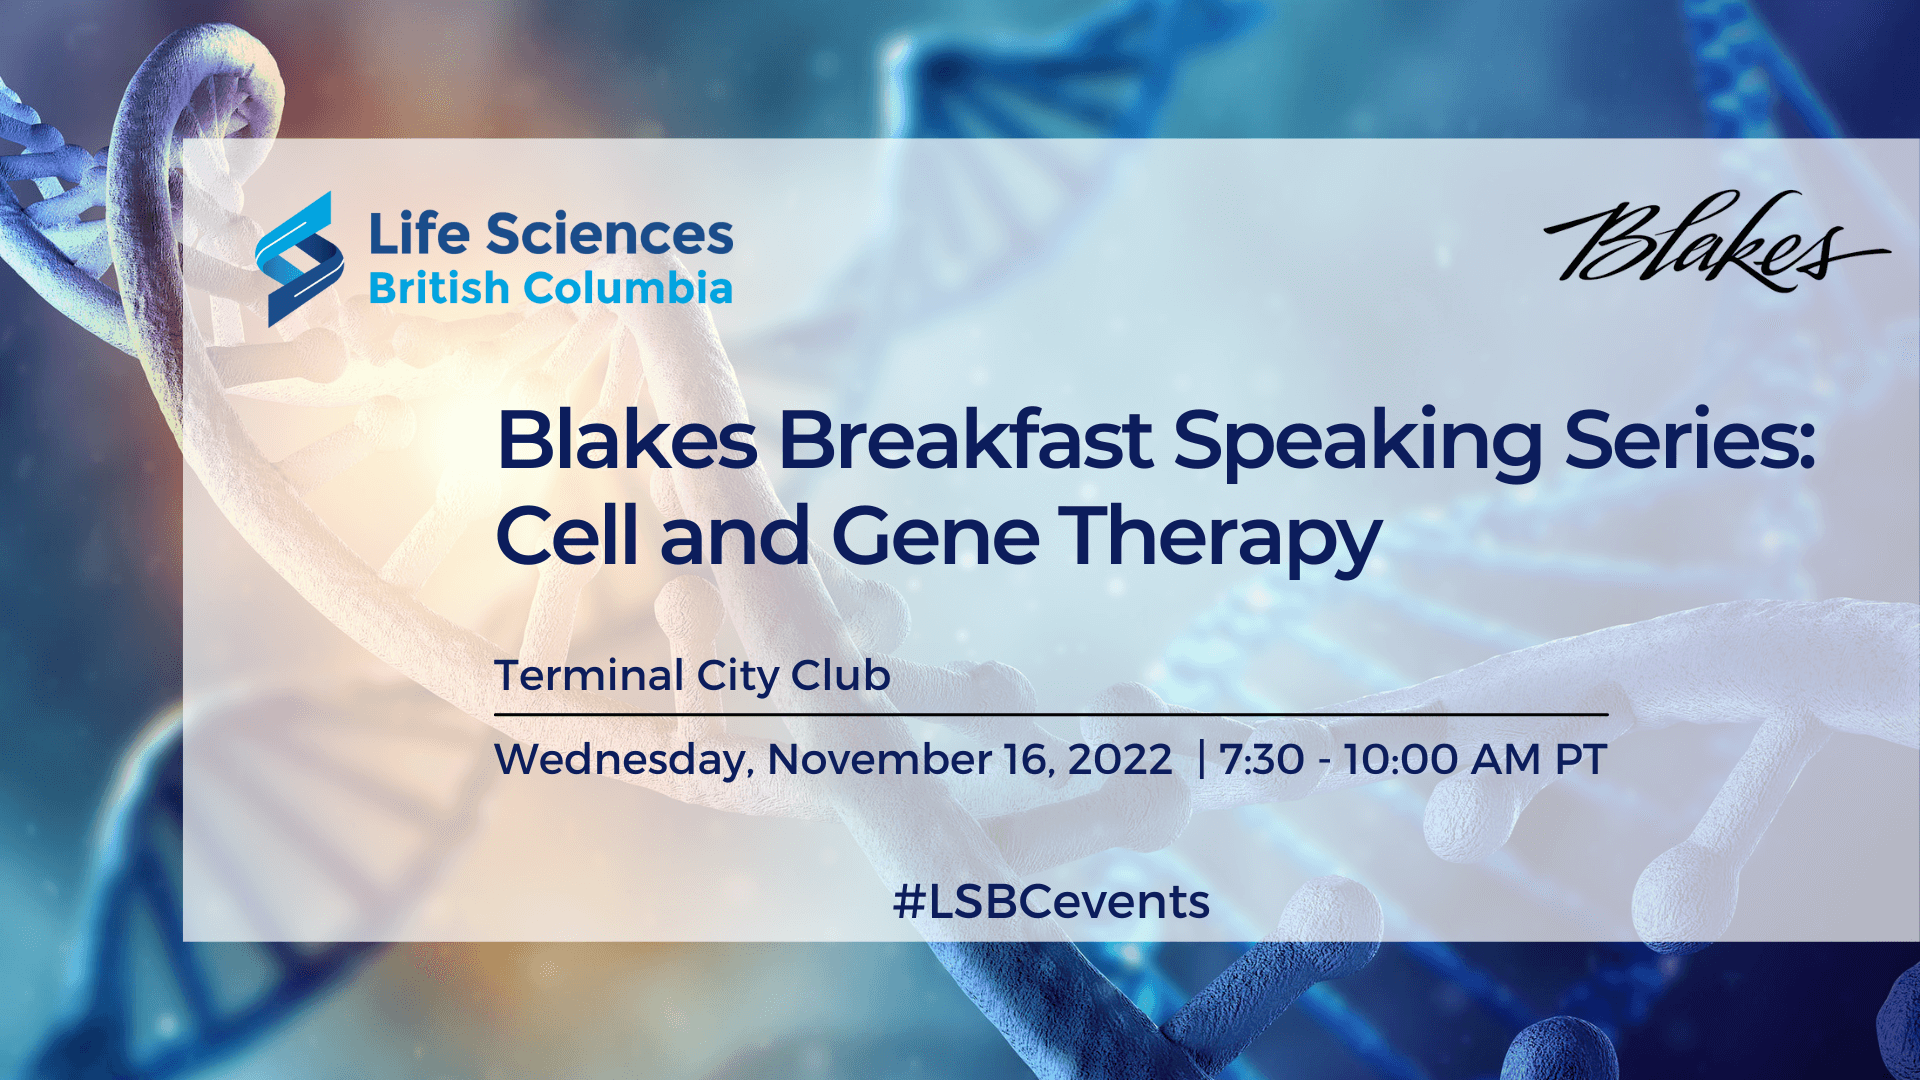 Blakes Breakfast Speaking Series: Cell and Gene Therapy